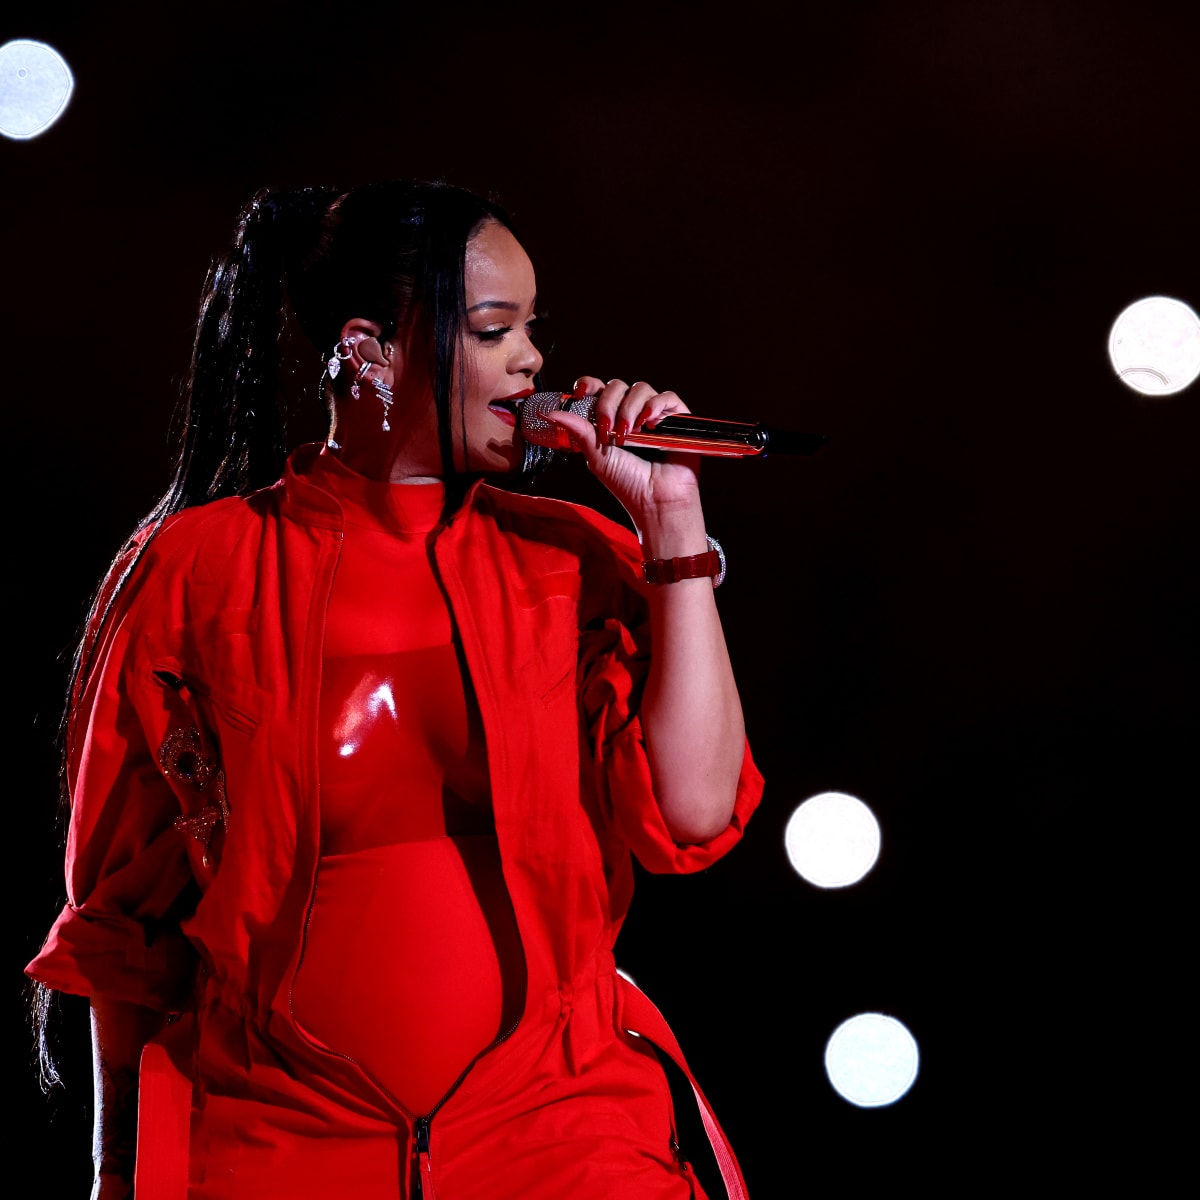 Rihanna worked with Northern Ireland designer on Super Bowl outfit